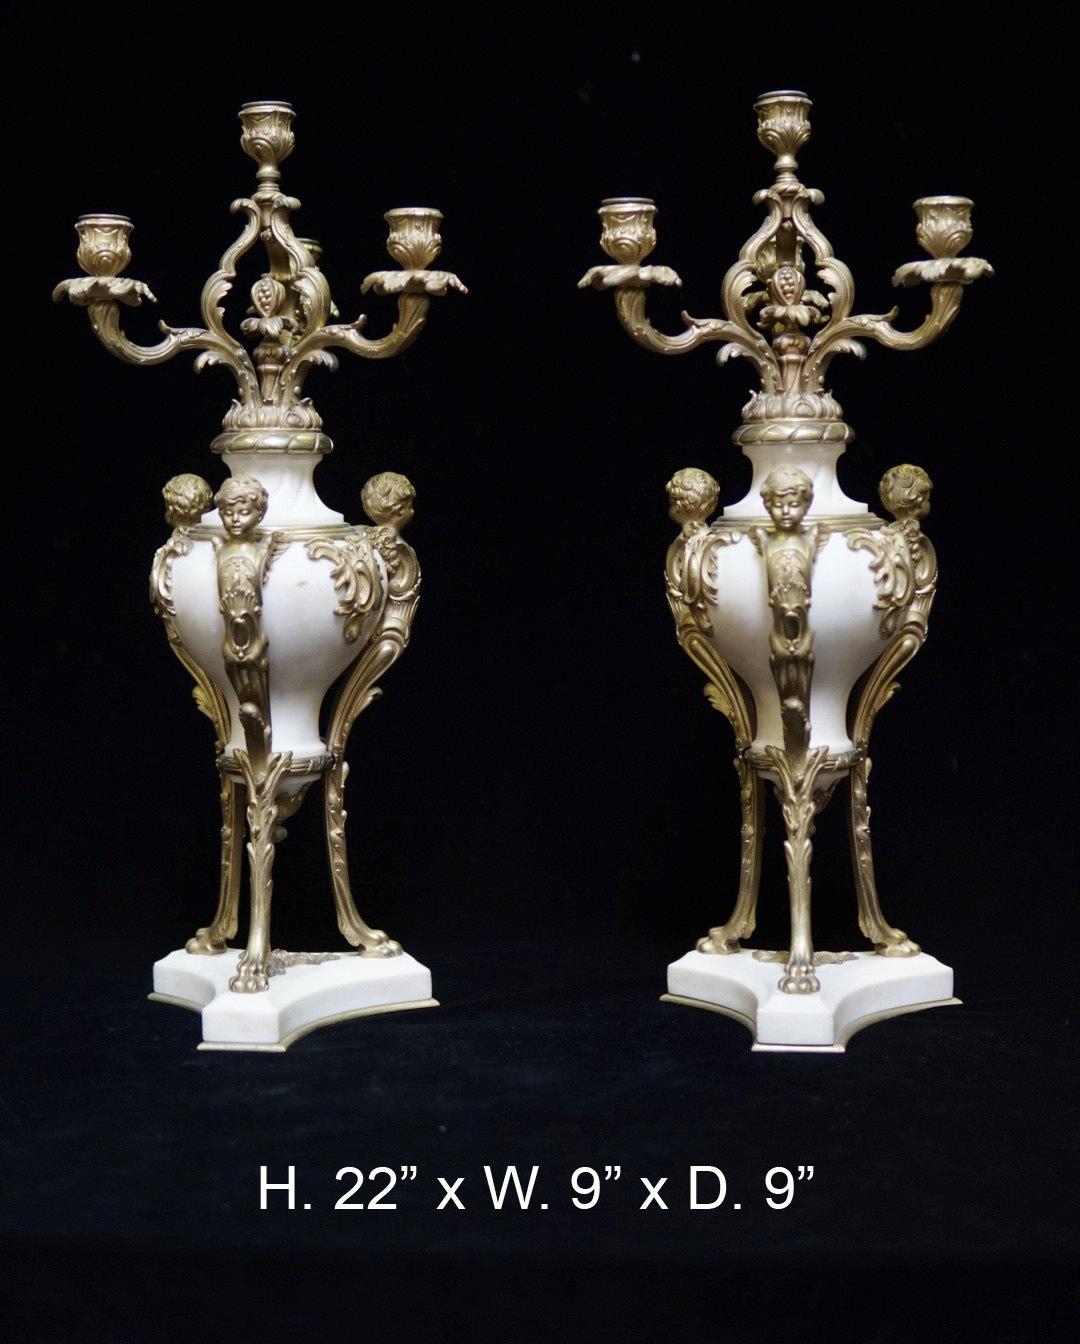 Impressive pair of 19th century French ormolu mounted marble figural candelabras. Each candelabra issuing four foliate inspired arms terminating in foliate decorated candle holder, above a carved white marble body mounted with three ormolu putti